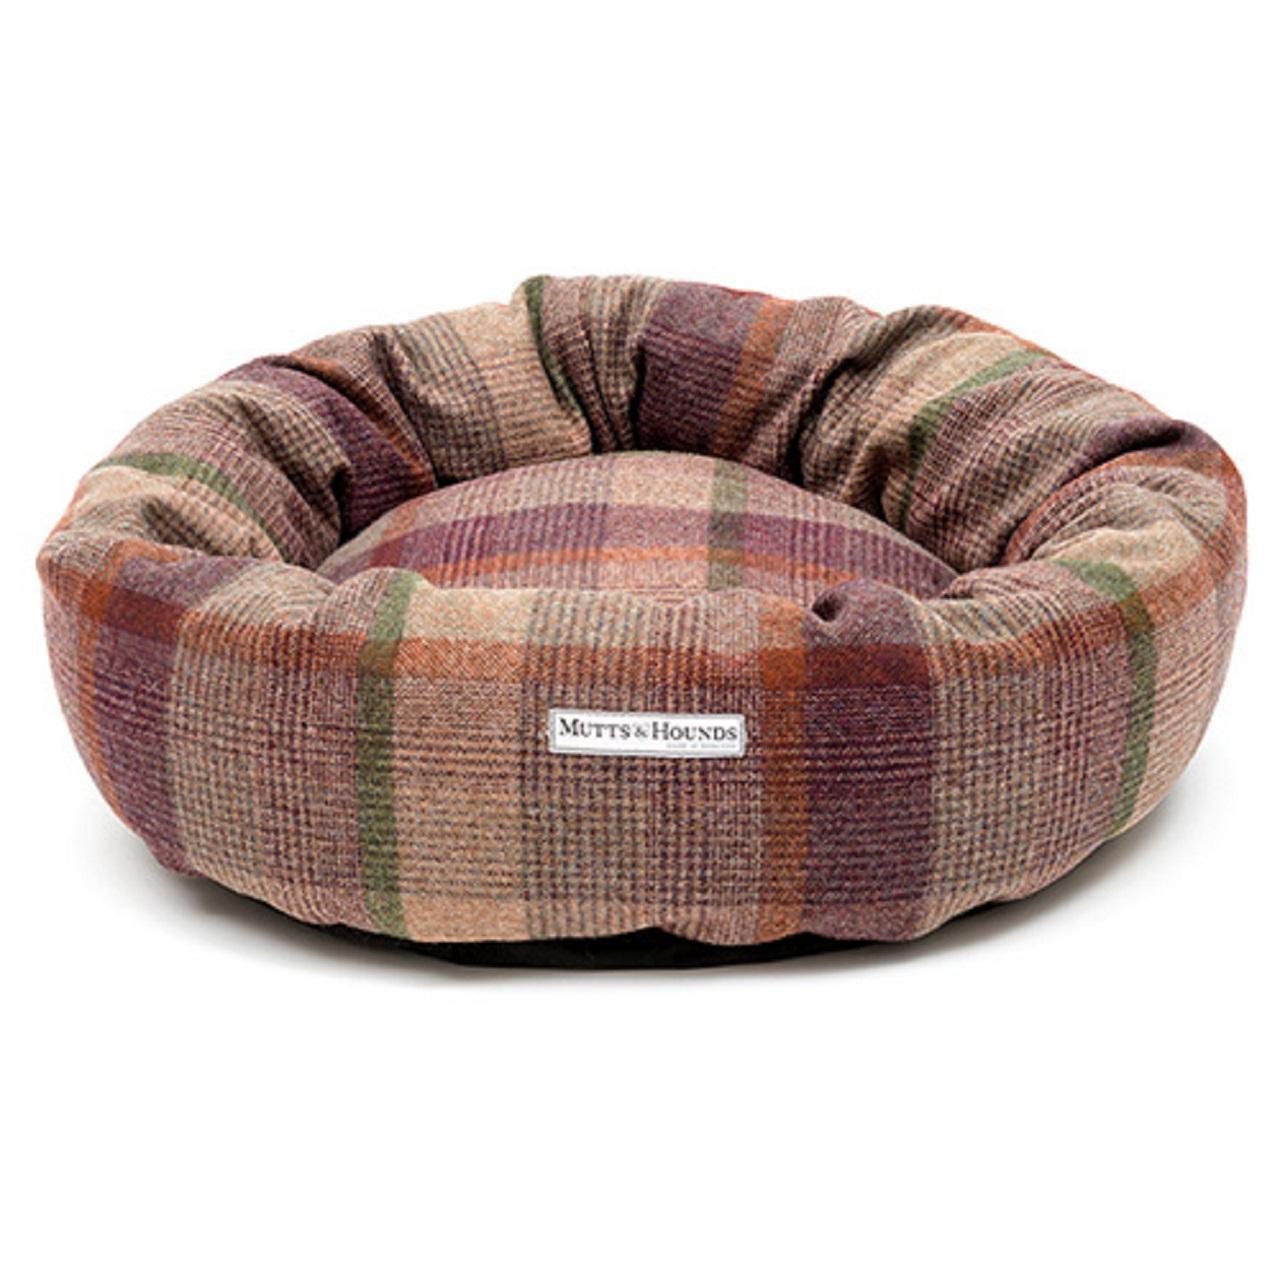 An image of Mutts & Hounds Grape Check Tweed Donut Bed Large